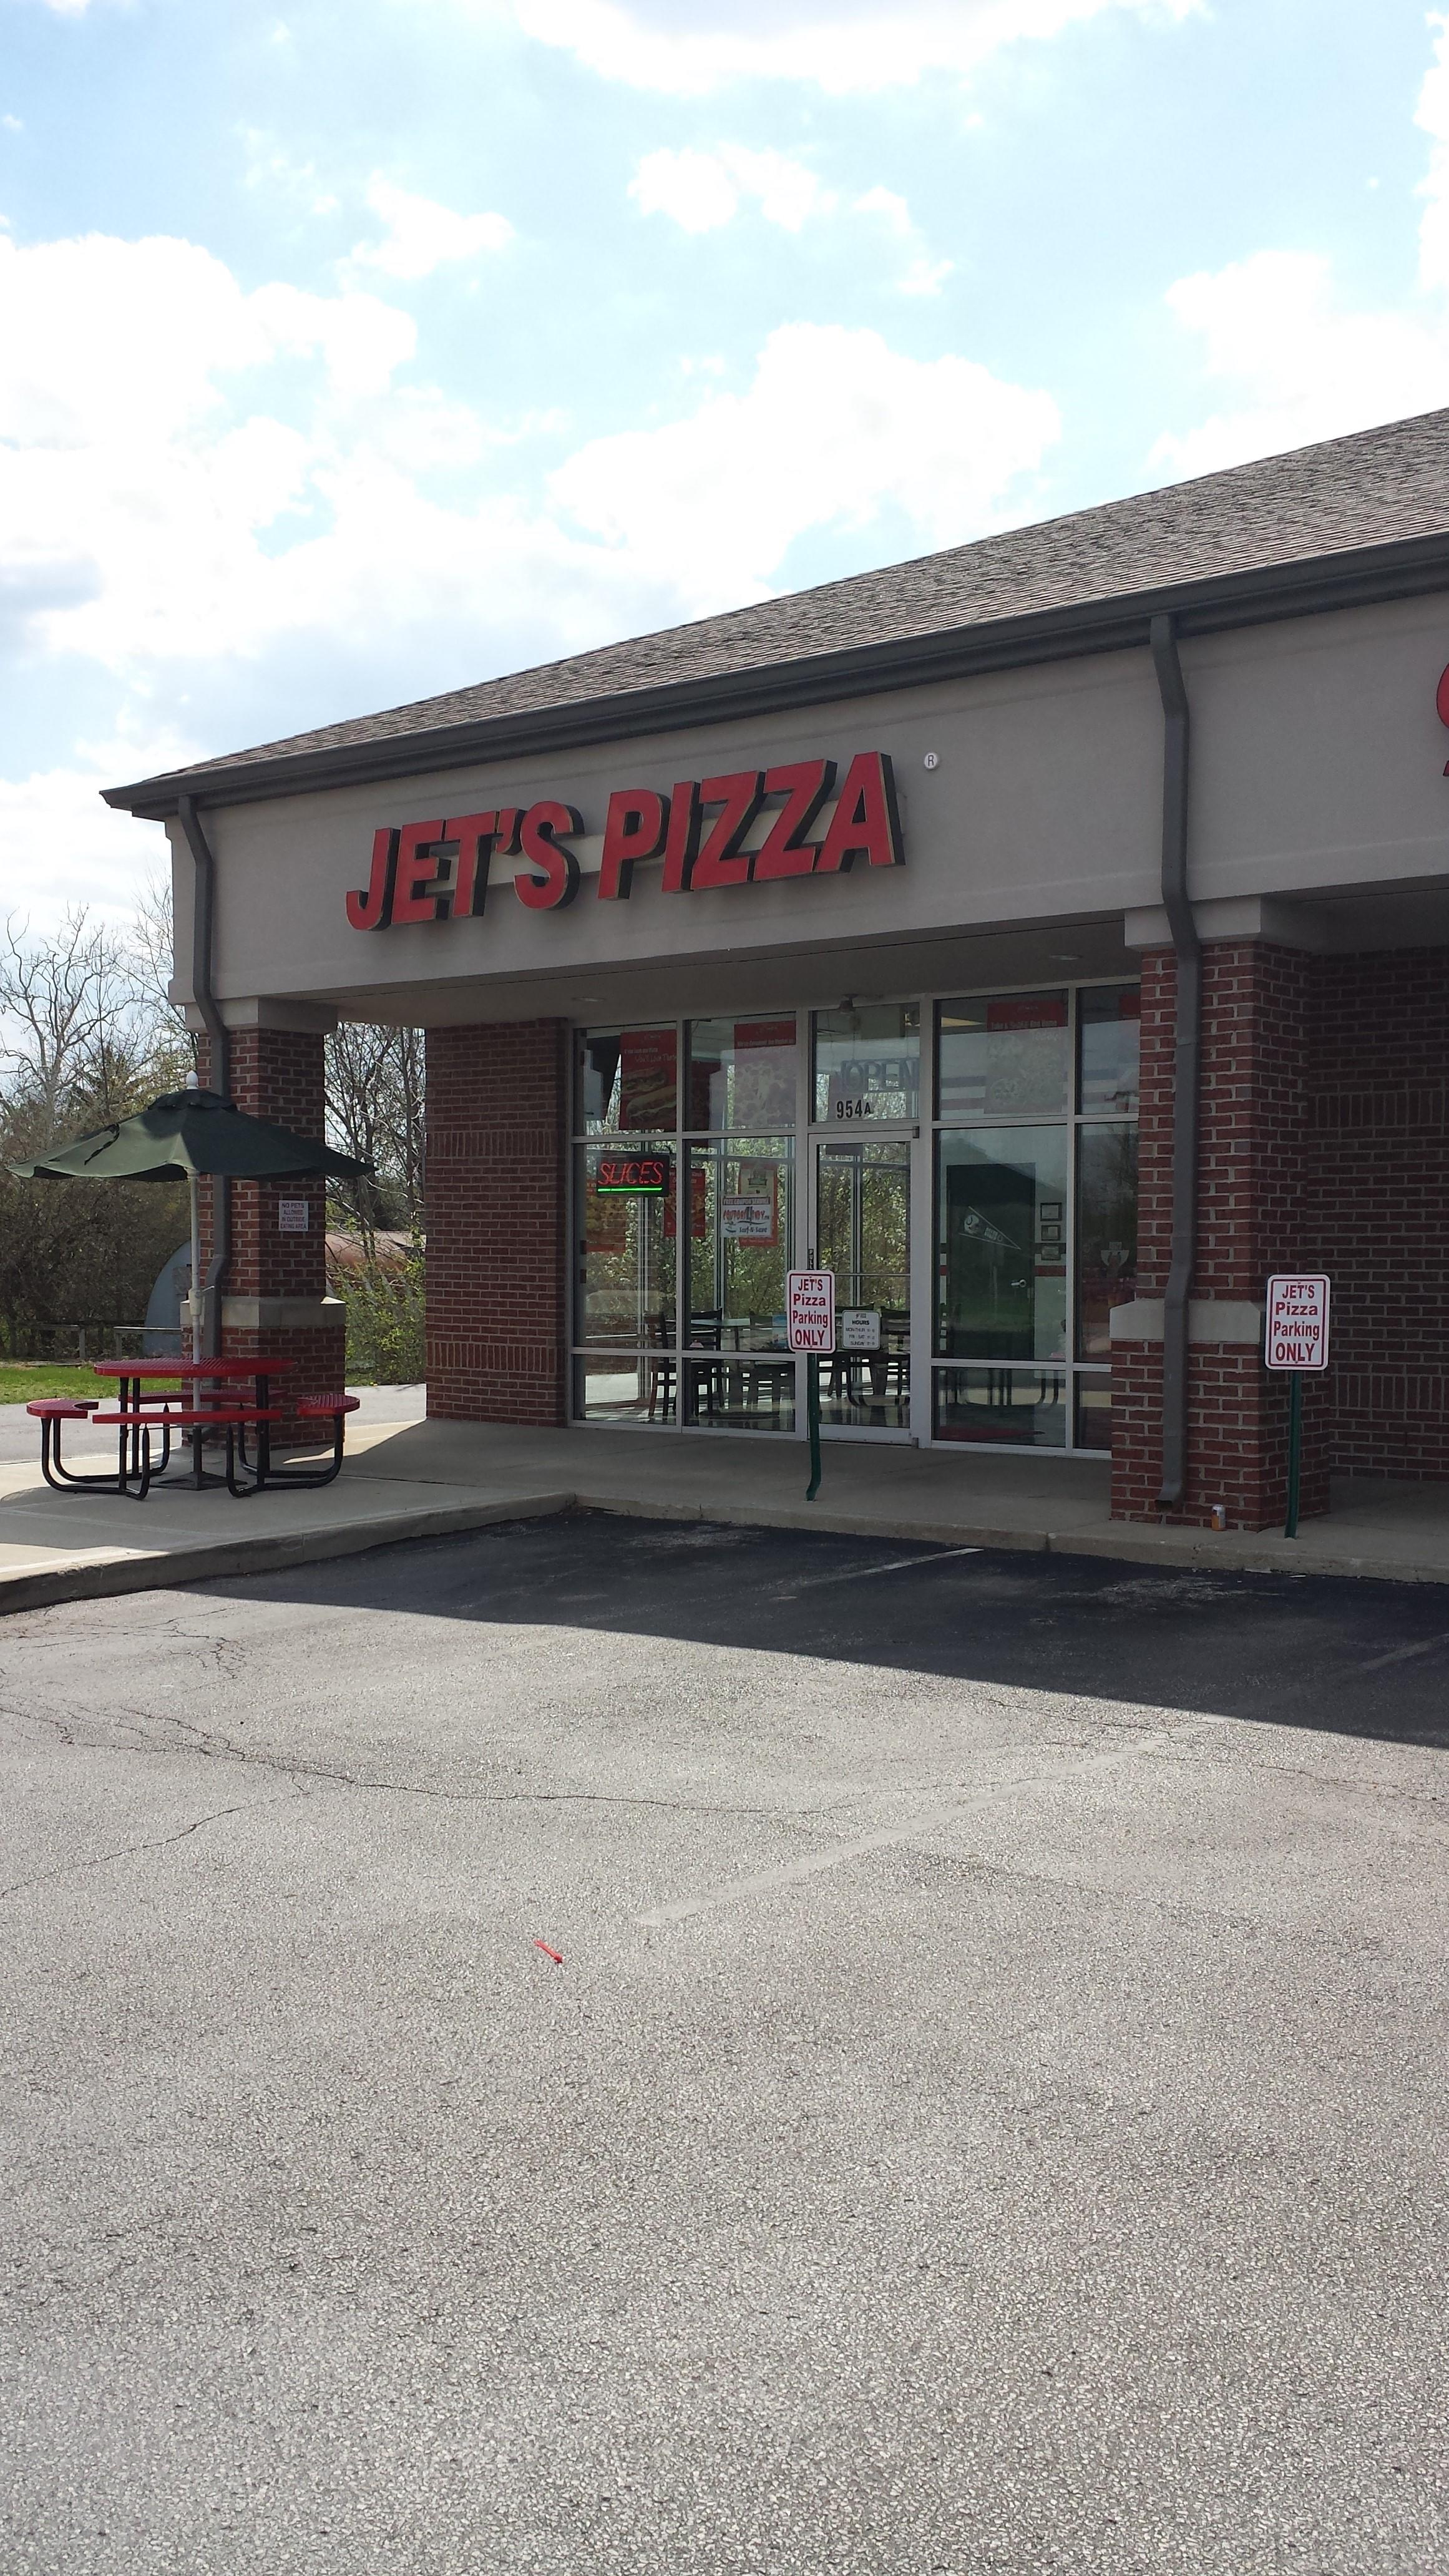 Jet's Pizza Coupons near me in Greenwood | 8coupons